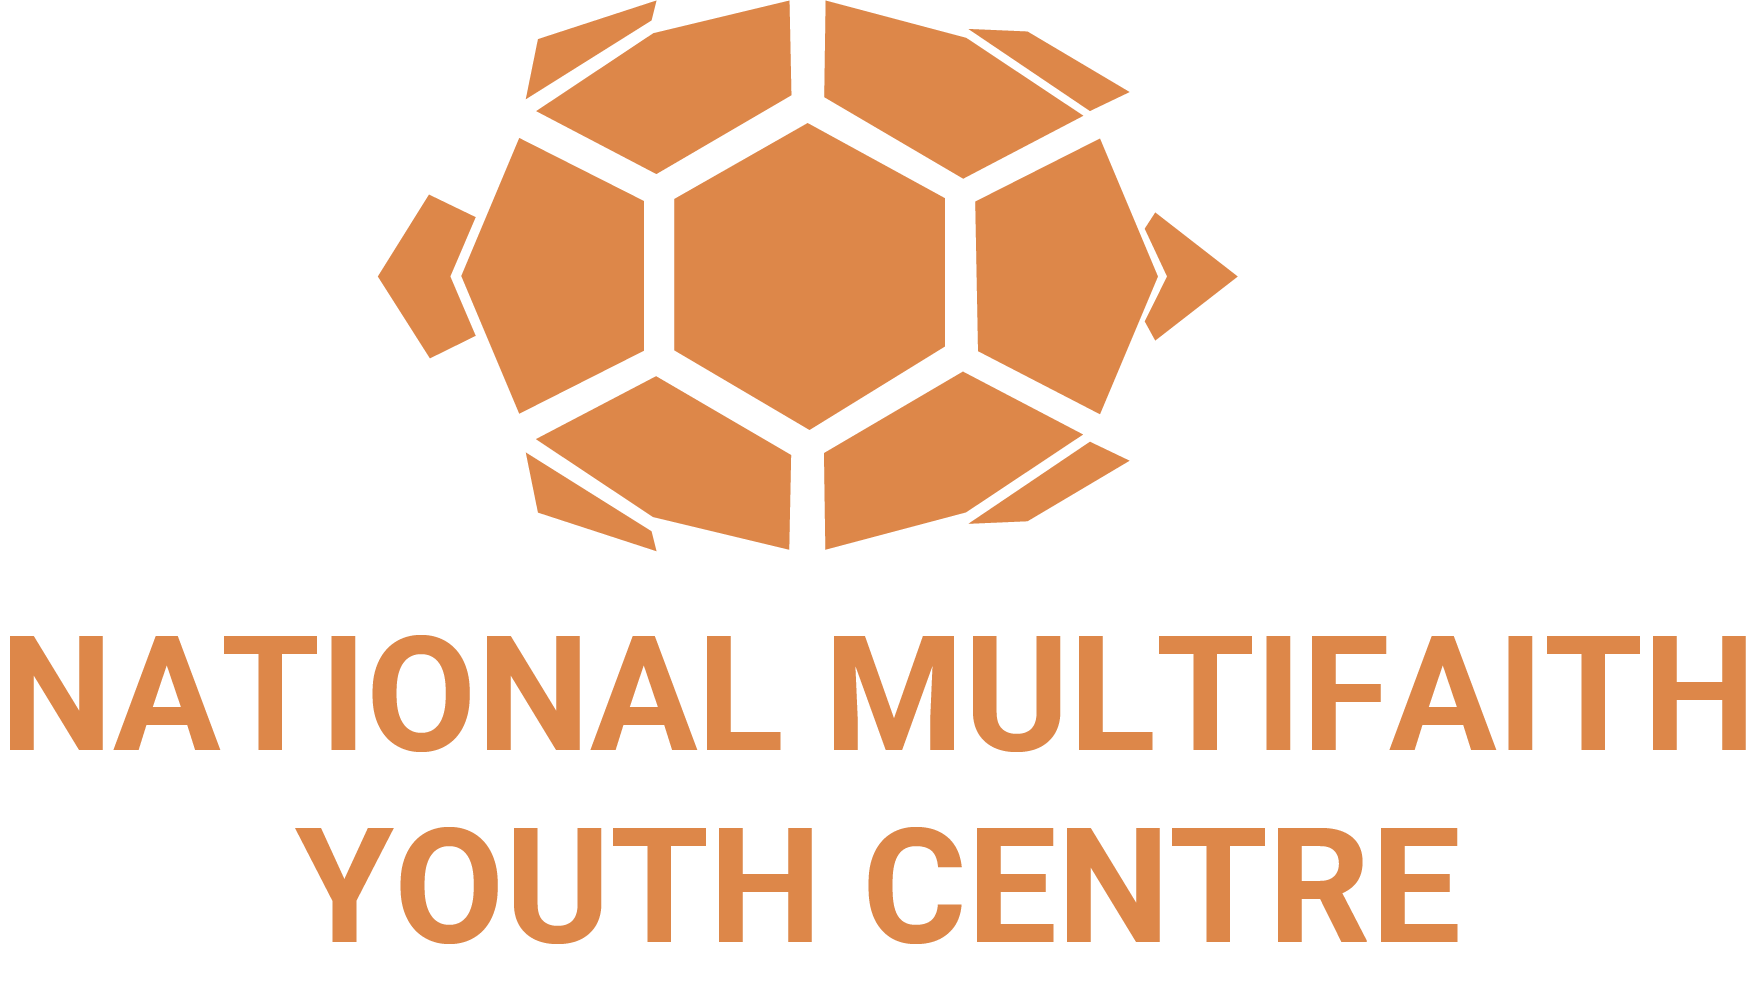 National Multifaith Youth Centre